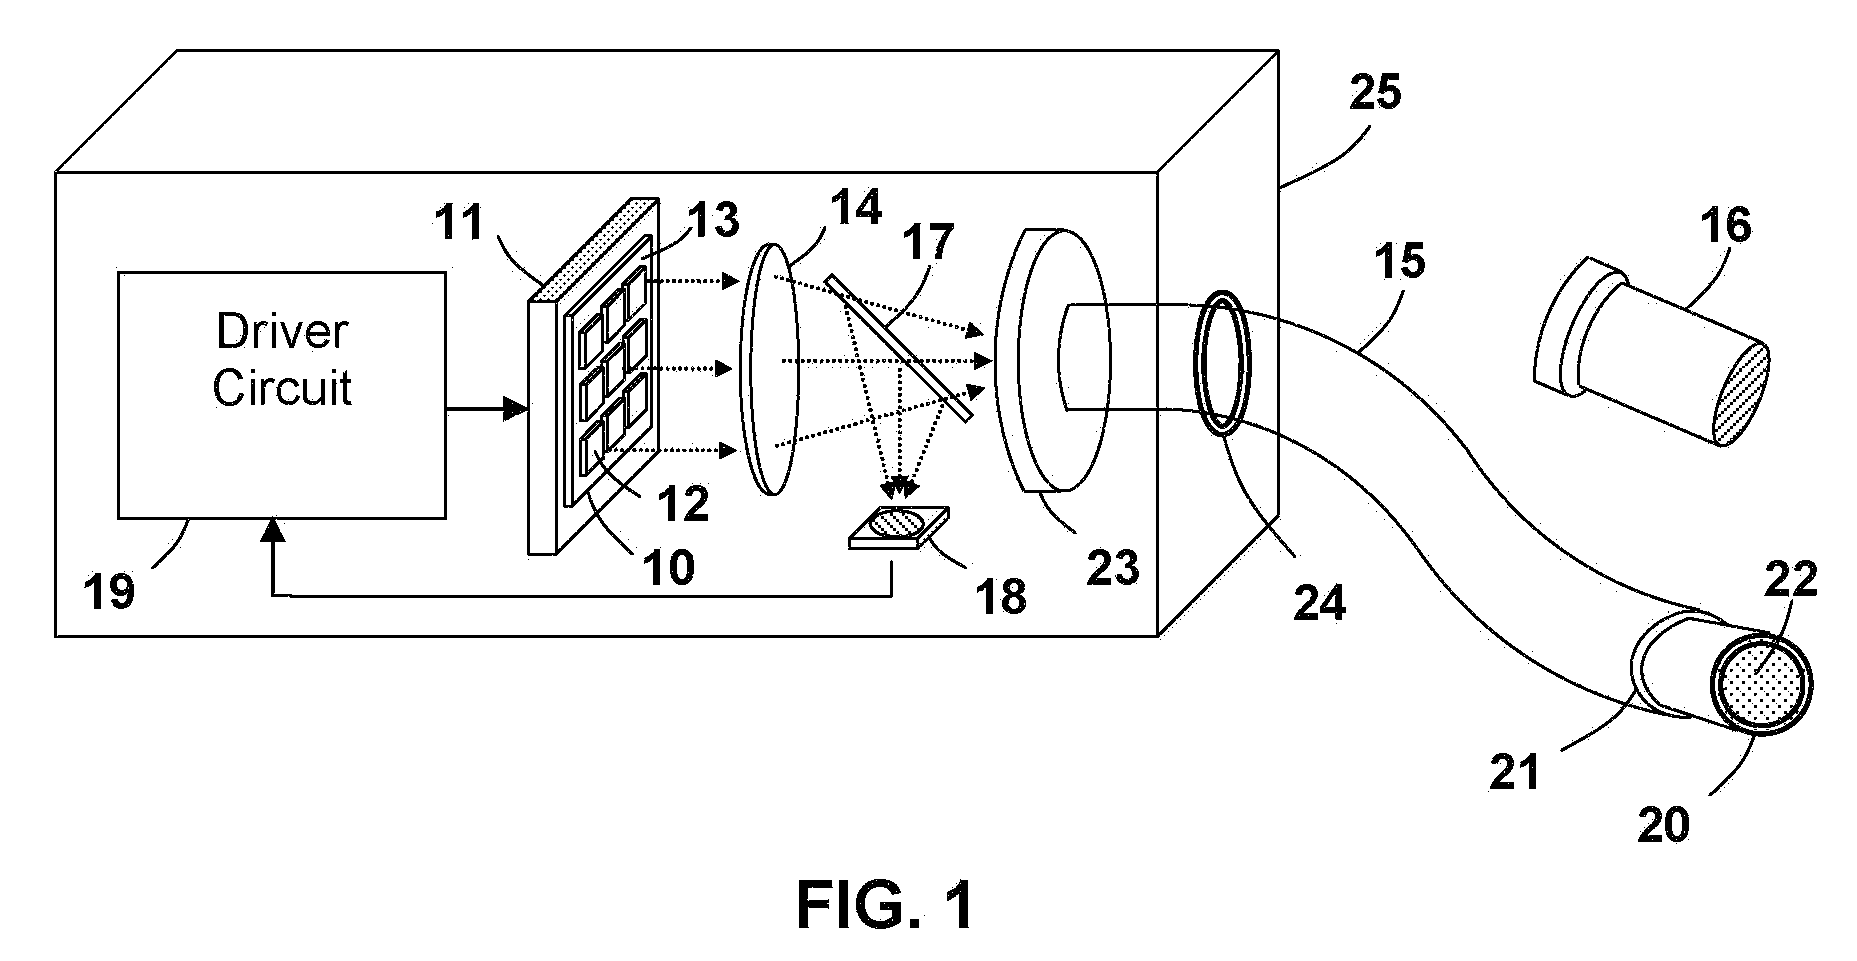 Light emitting apparatus for medical applications